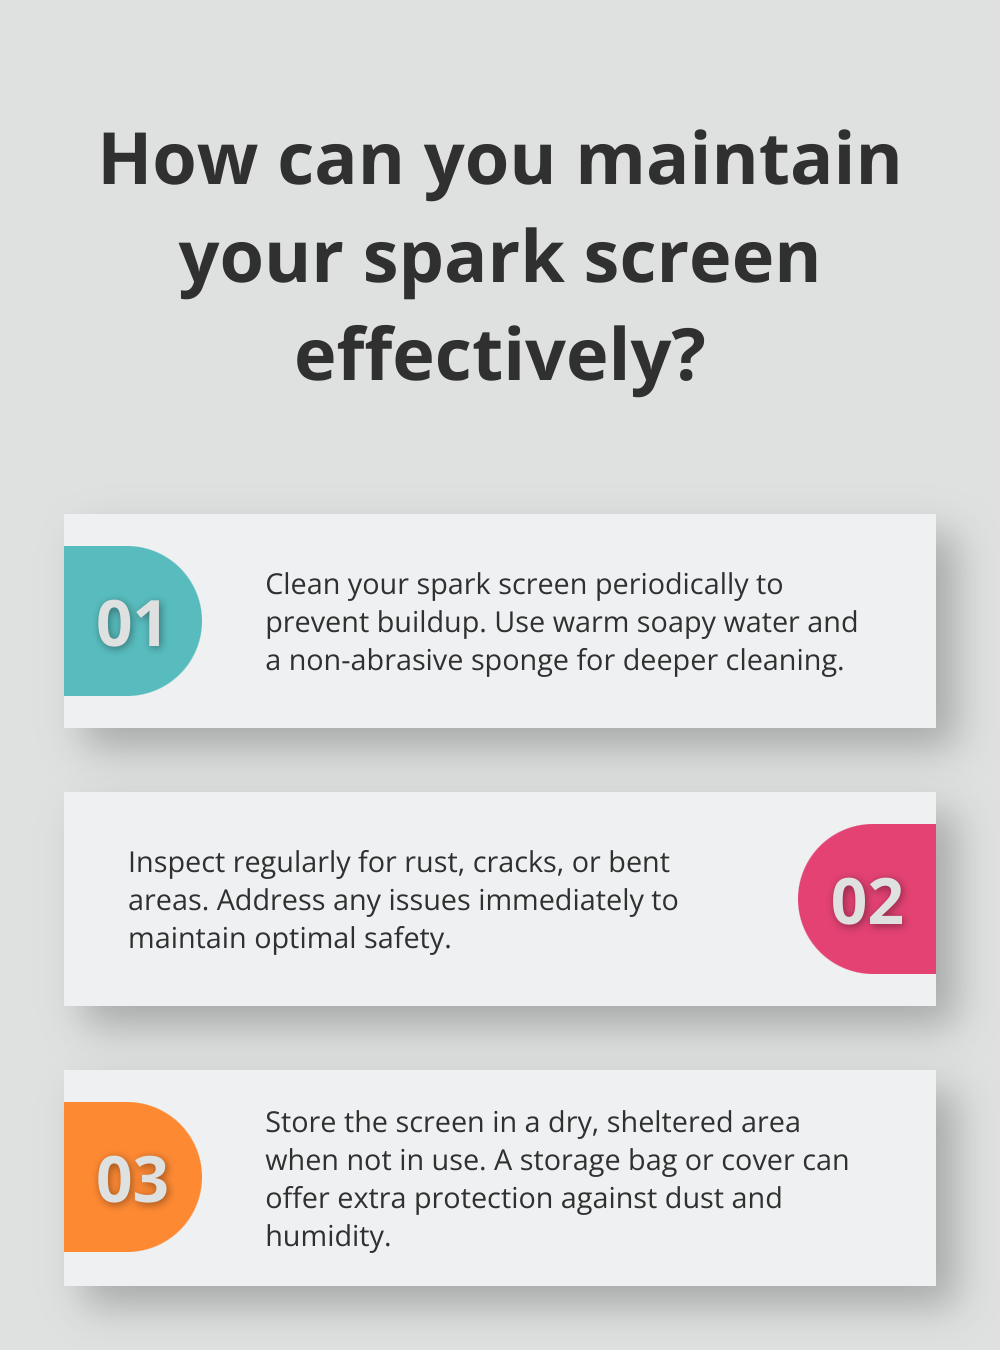 Fact - How can you maintain your spark screen effectively?